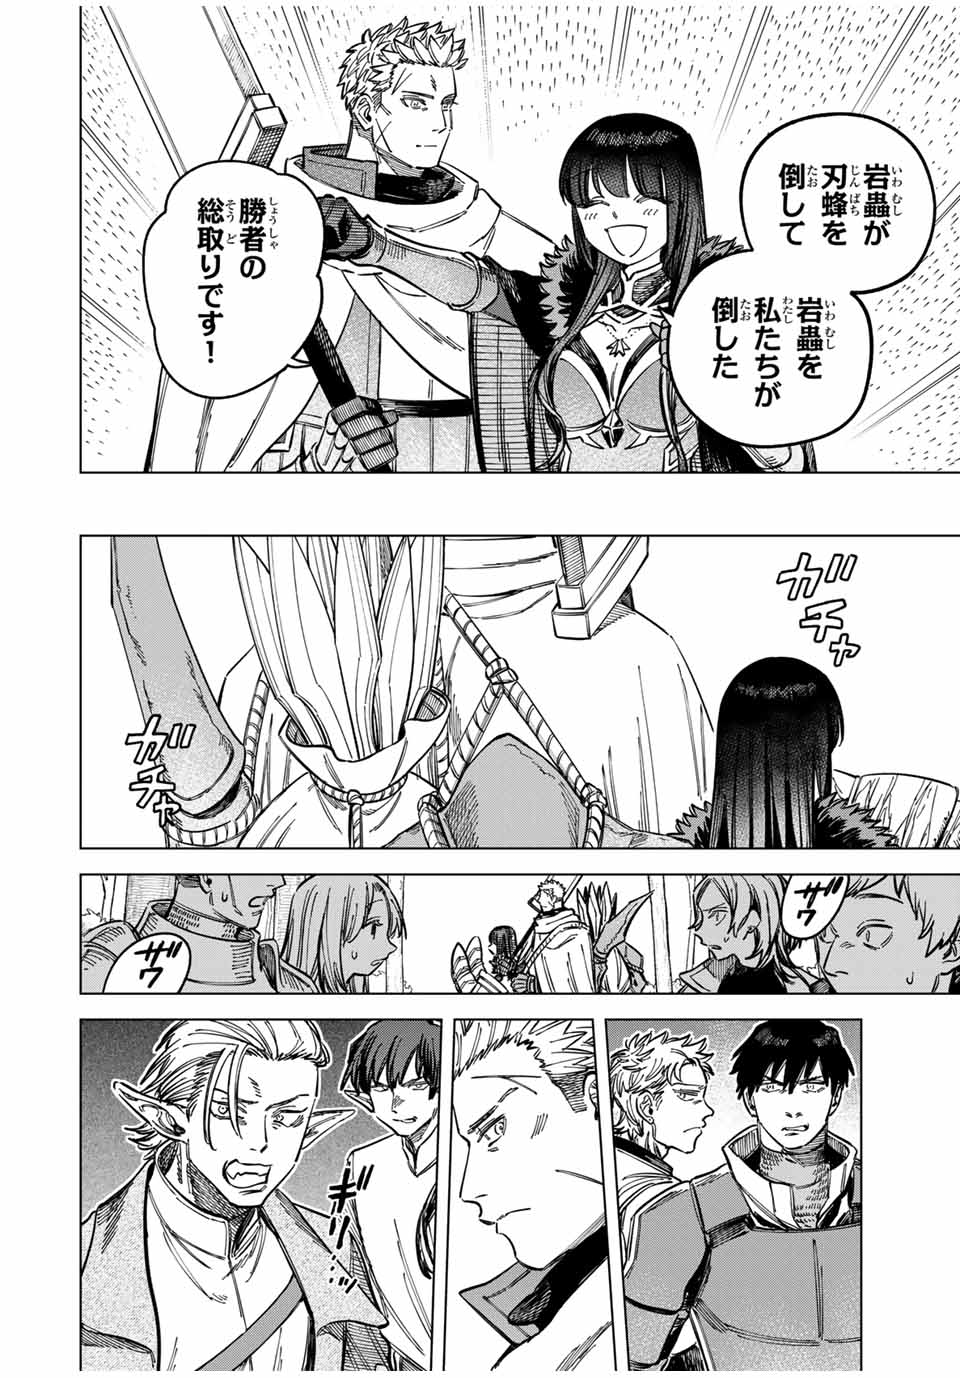 Witch and Mercenary 魔女と傭兵 第9.2話 - Page 11